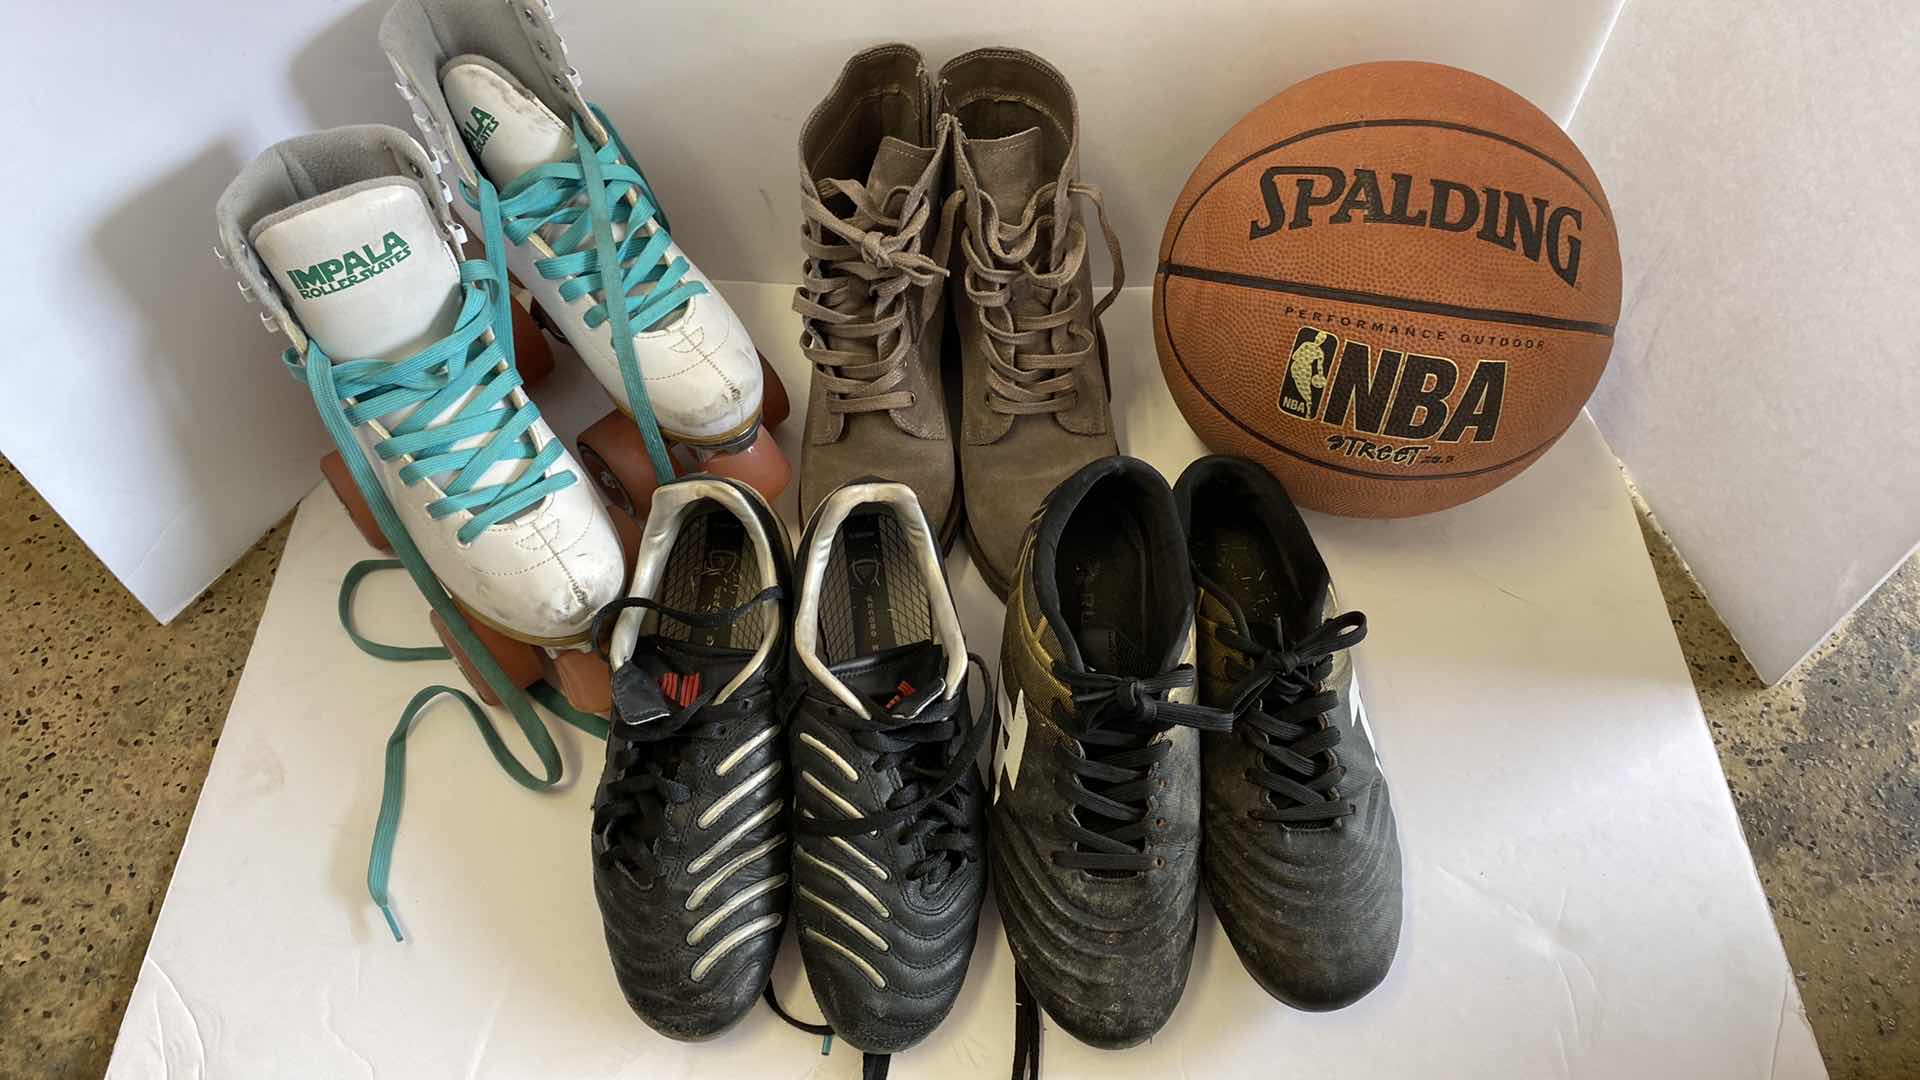 Photo 5 of LADIES SIZE 3 SKATES, SIZE 7 BOOTS AND CLEATS SPALDING BASKETBALL